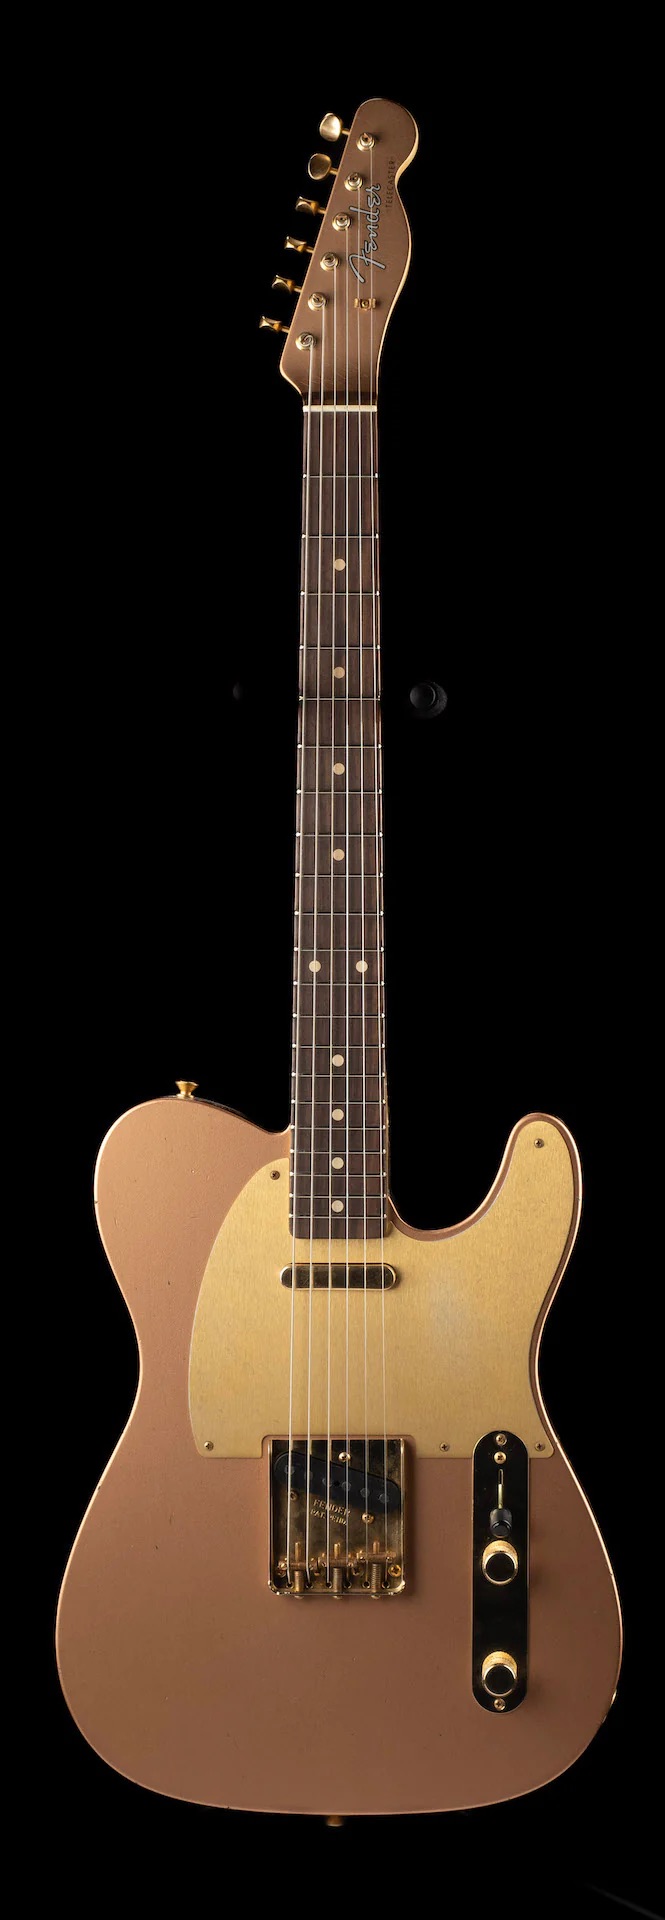 Telecaster Love Thread, No Archtops Allowed-3-p7080143_665x1920-jpeg